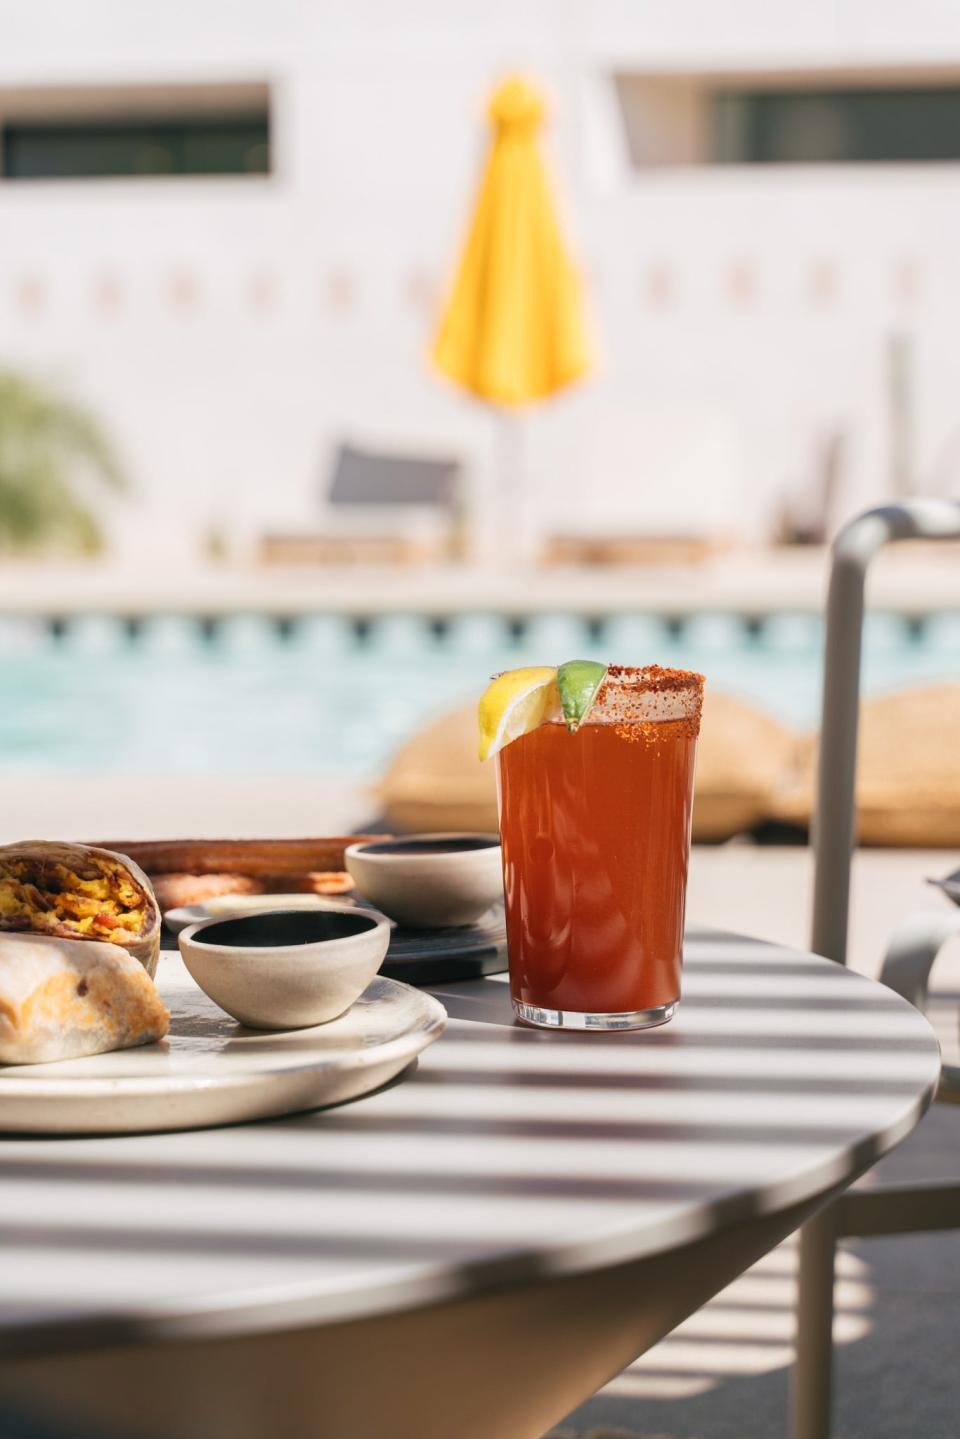 Maleza is a restaurant in Drift Palm Springs and has a brunch offering every weekend. On the first Sunday of every month, they have a guest appearance from local band Las Tías.